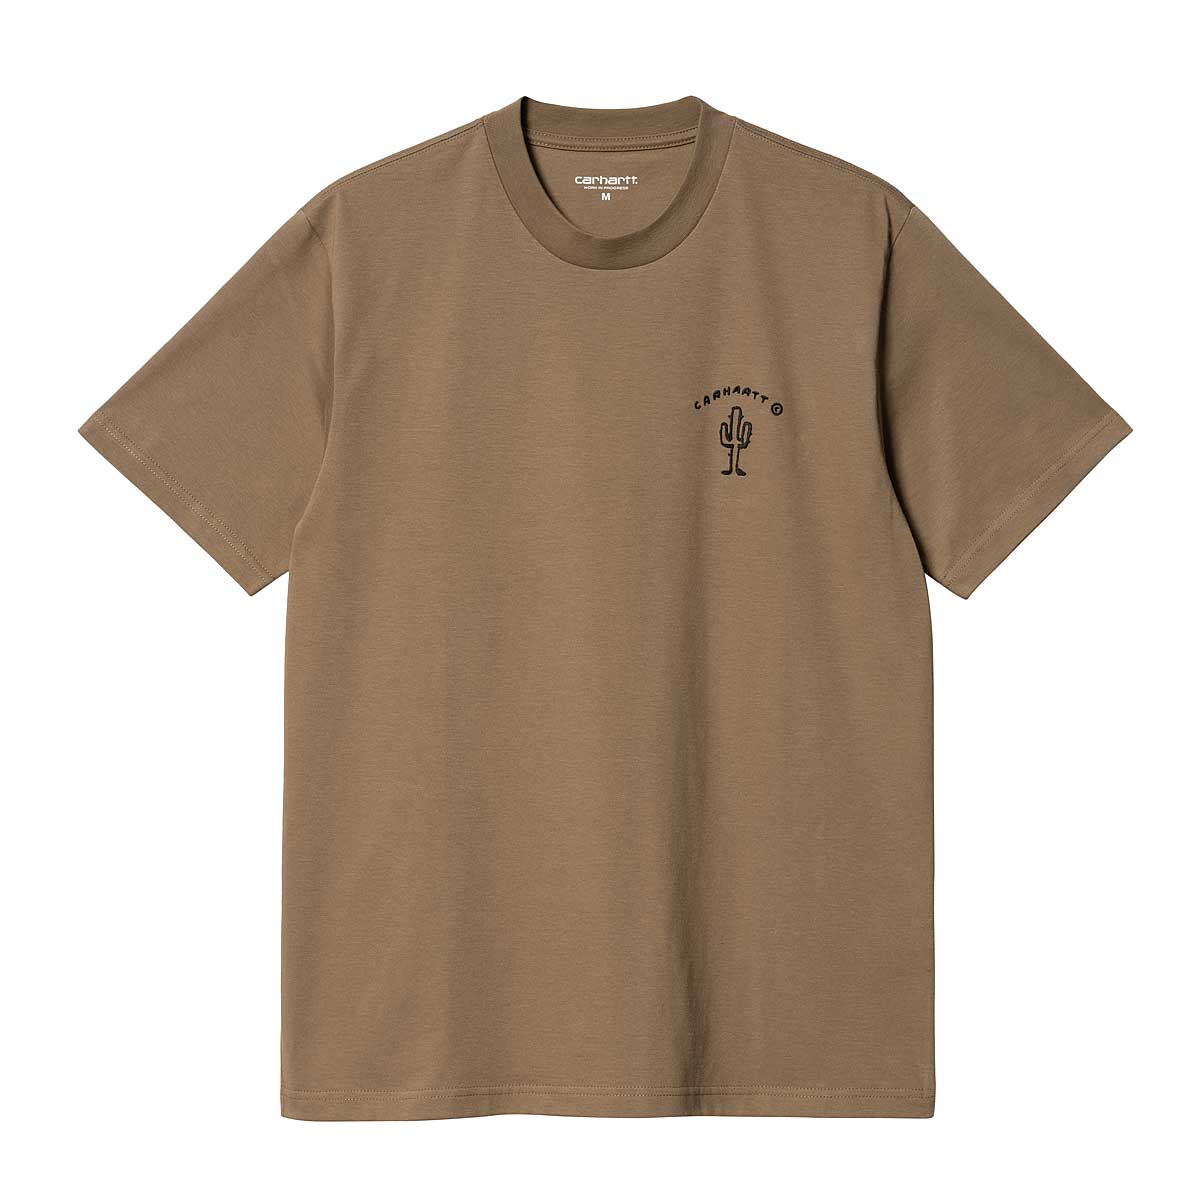 Carhartt Wip S/s New Frontier T-shirt, Braun/brown product